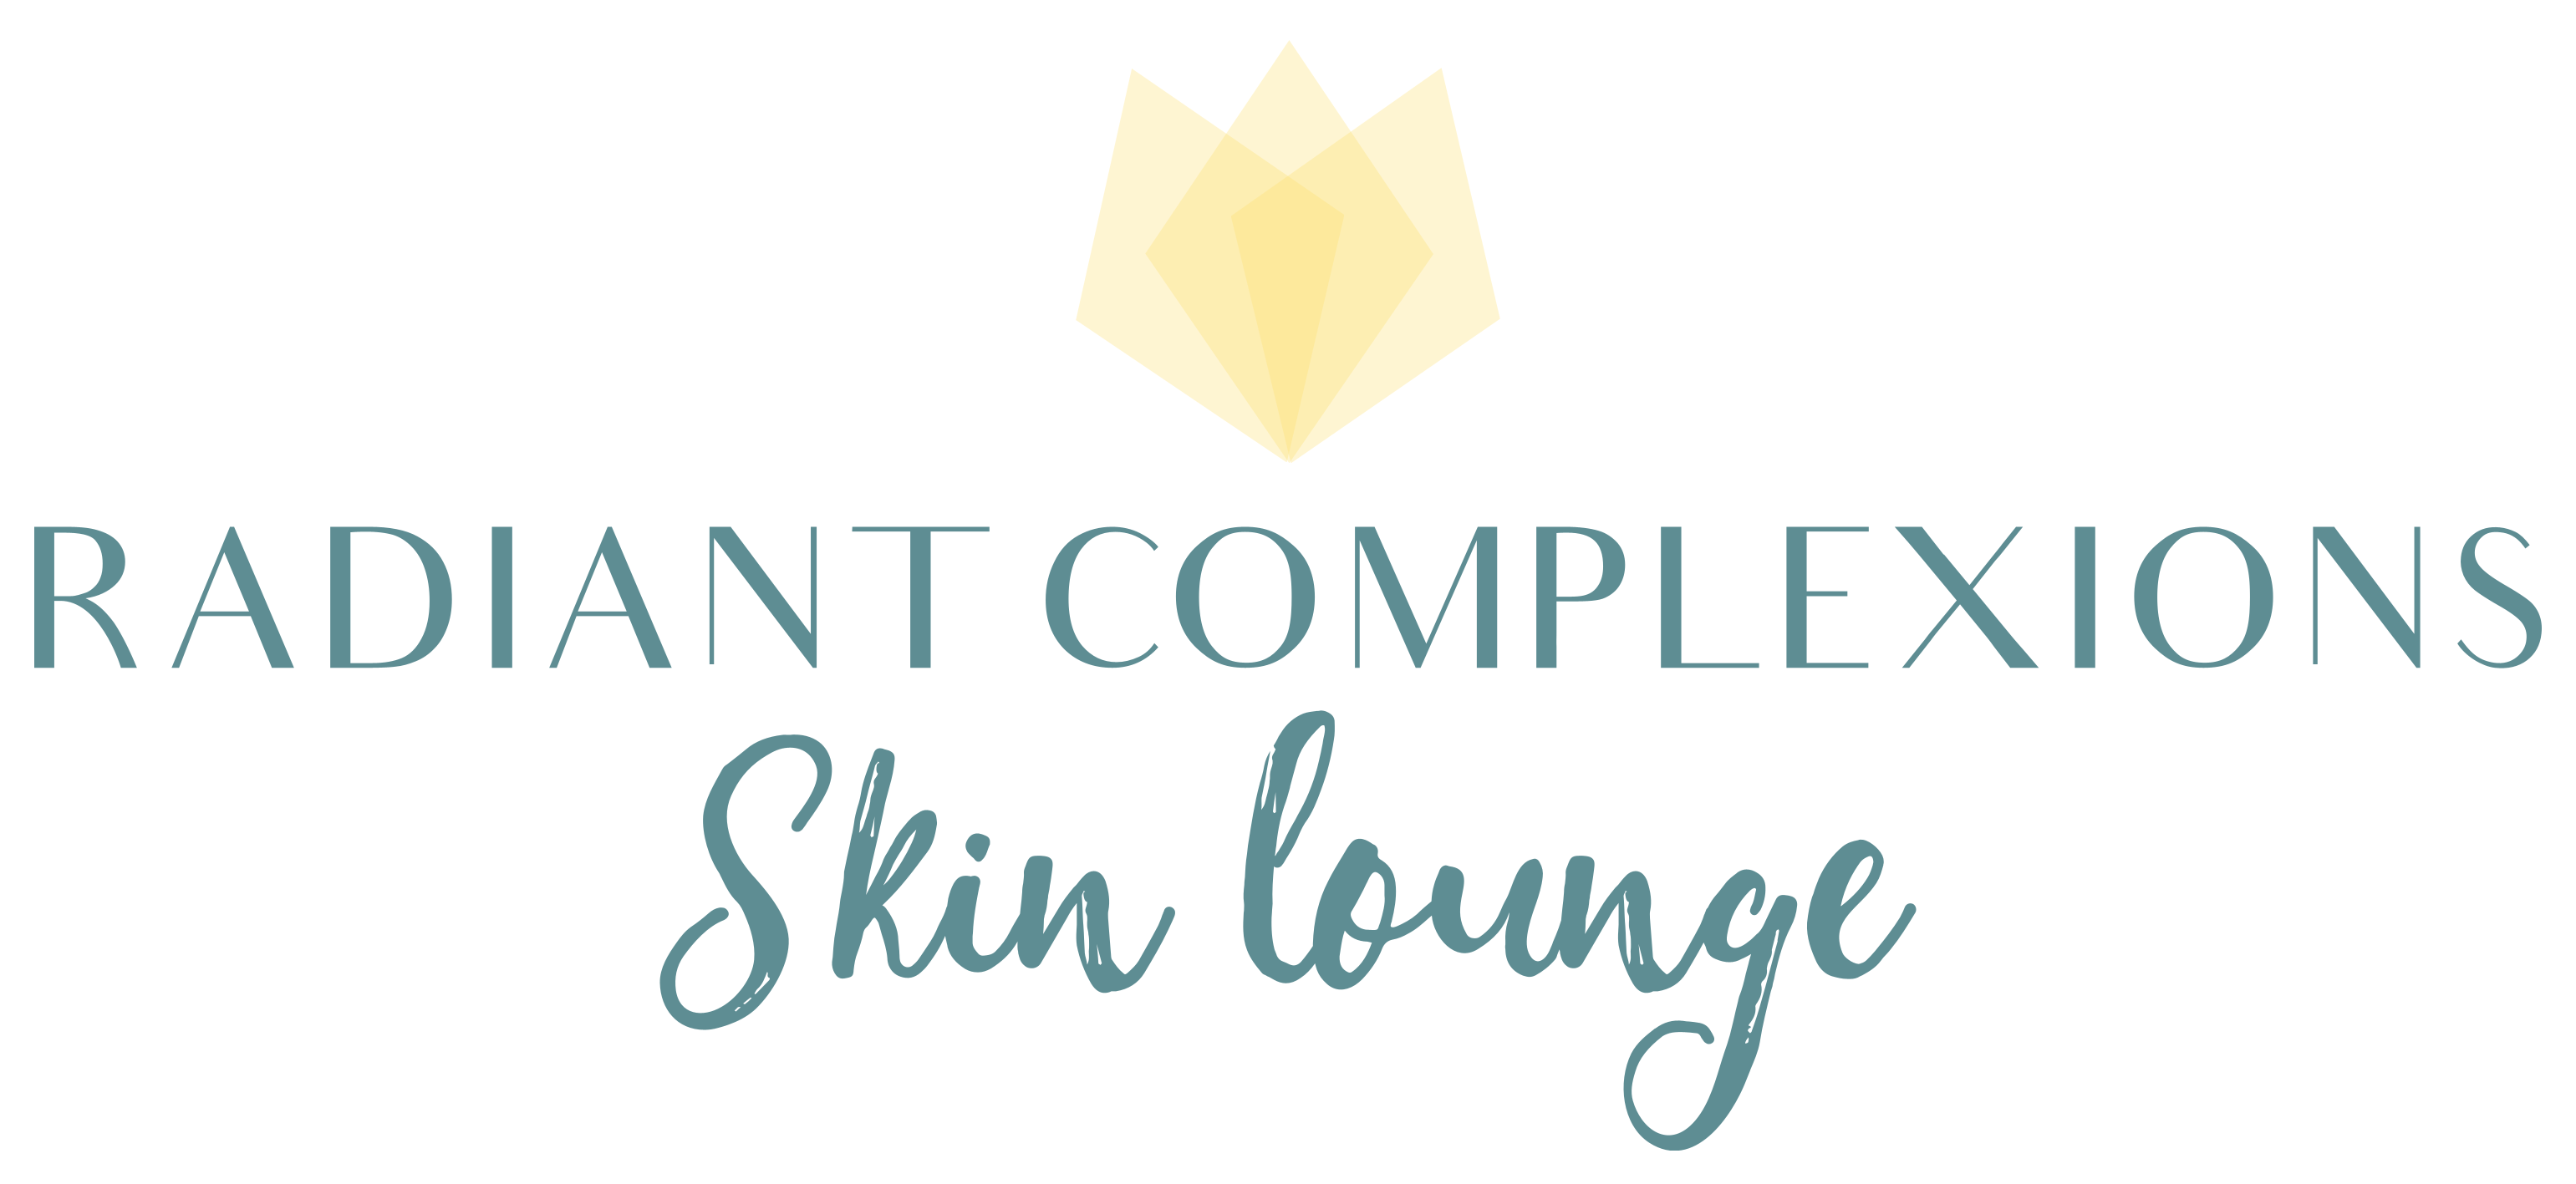 Radiant Complexions Skin Lounge